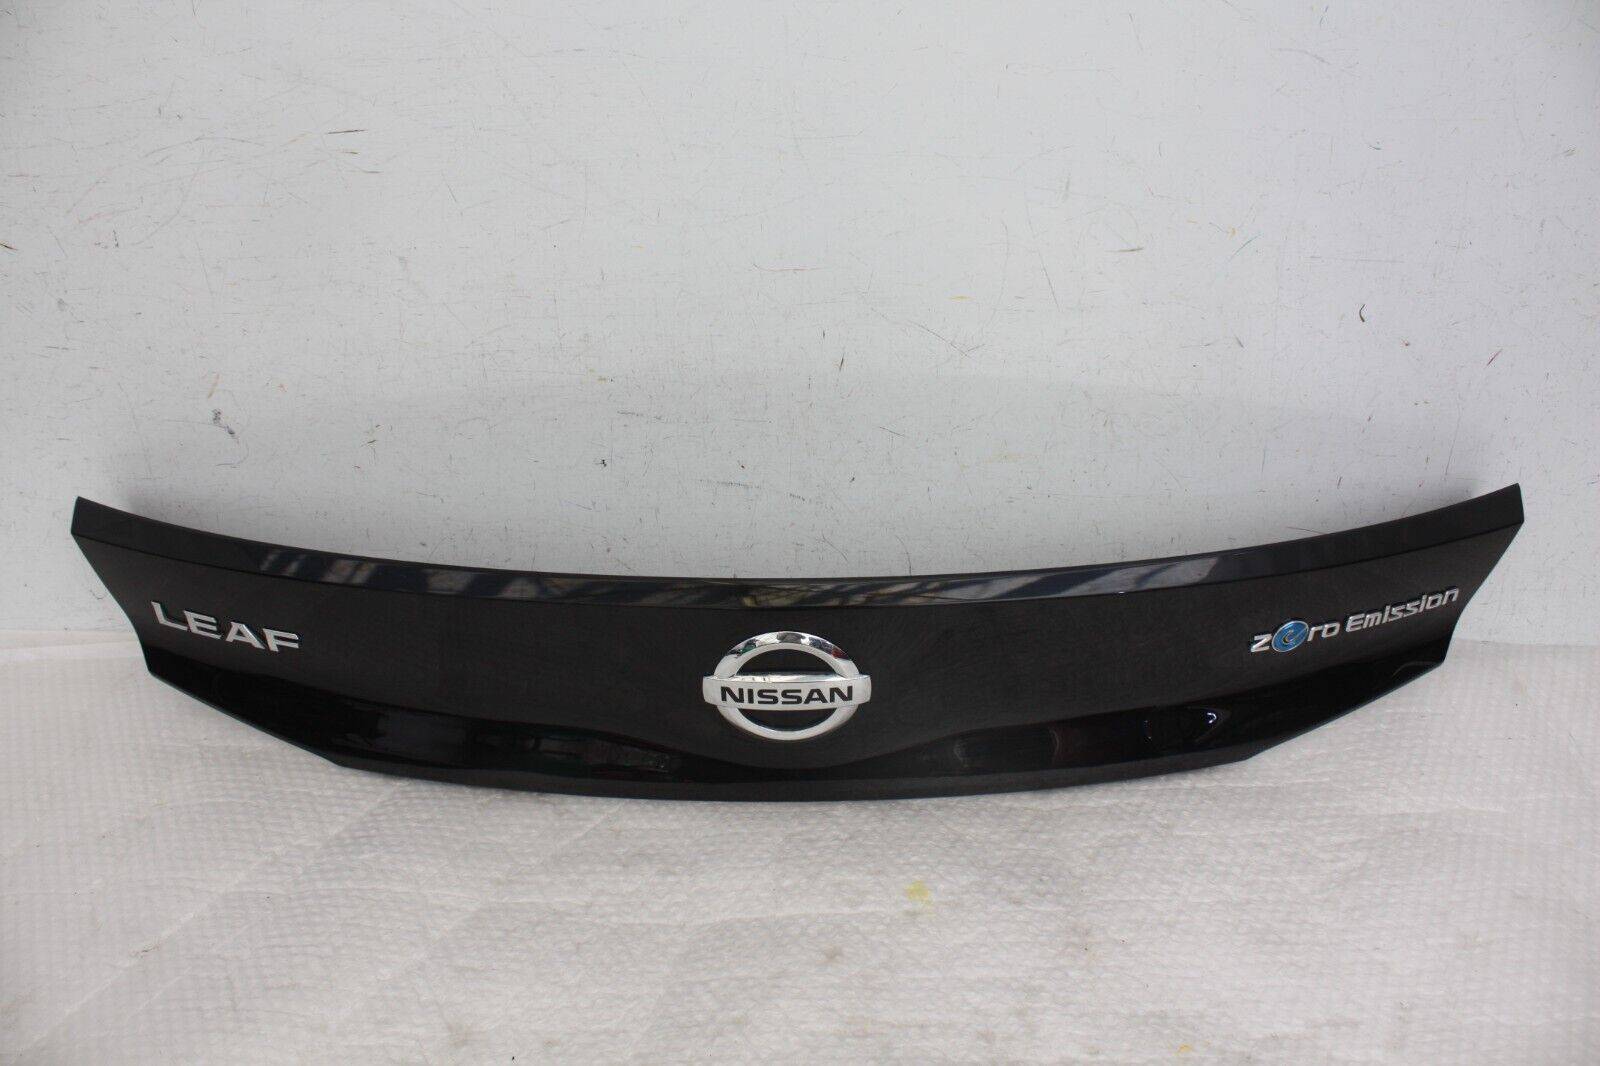 Nissan Leaf Rear Tailgate Trunk Lid Panel Cover Trim 90810 5SH0A FIXING DAMAGED 176365212247